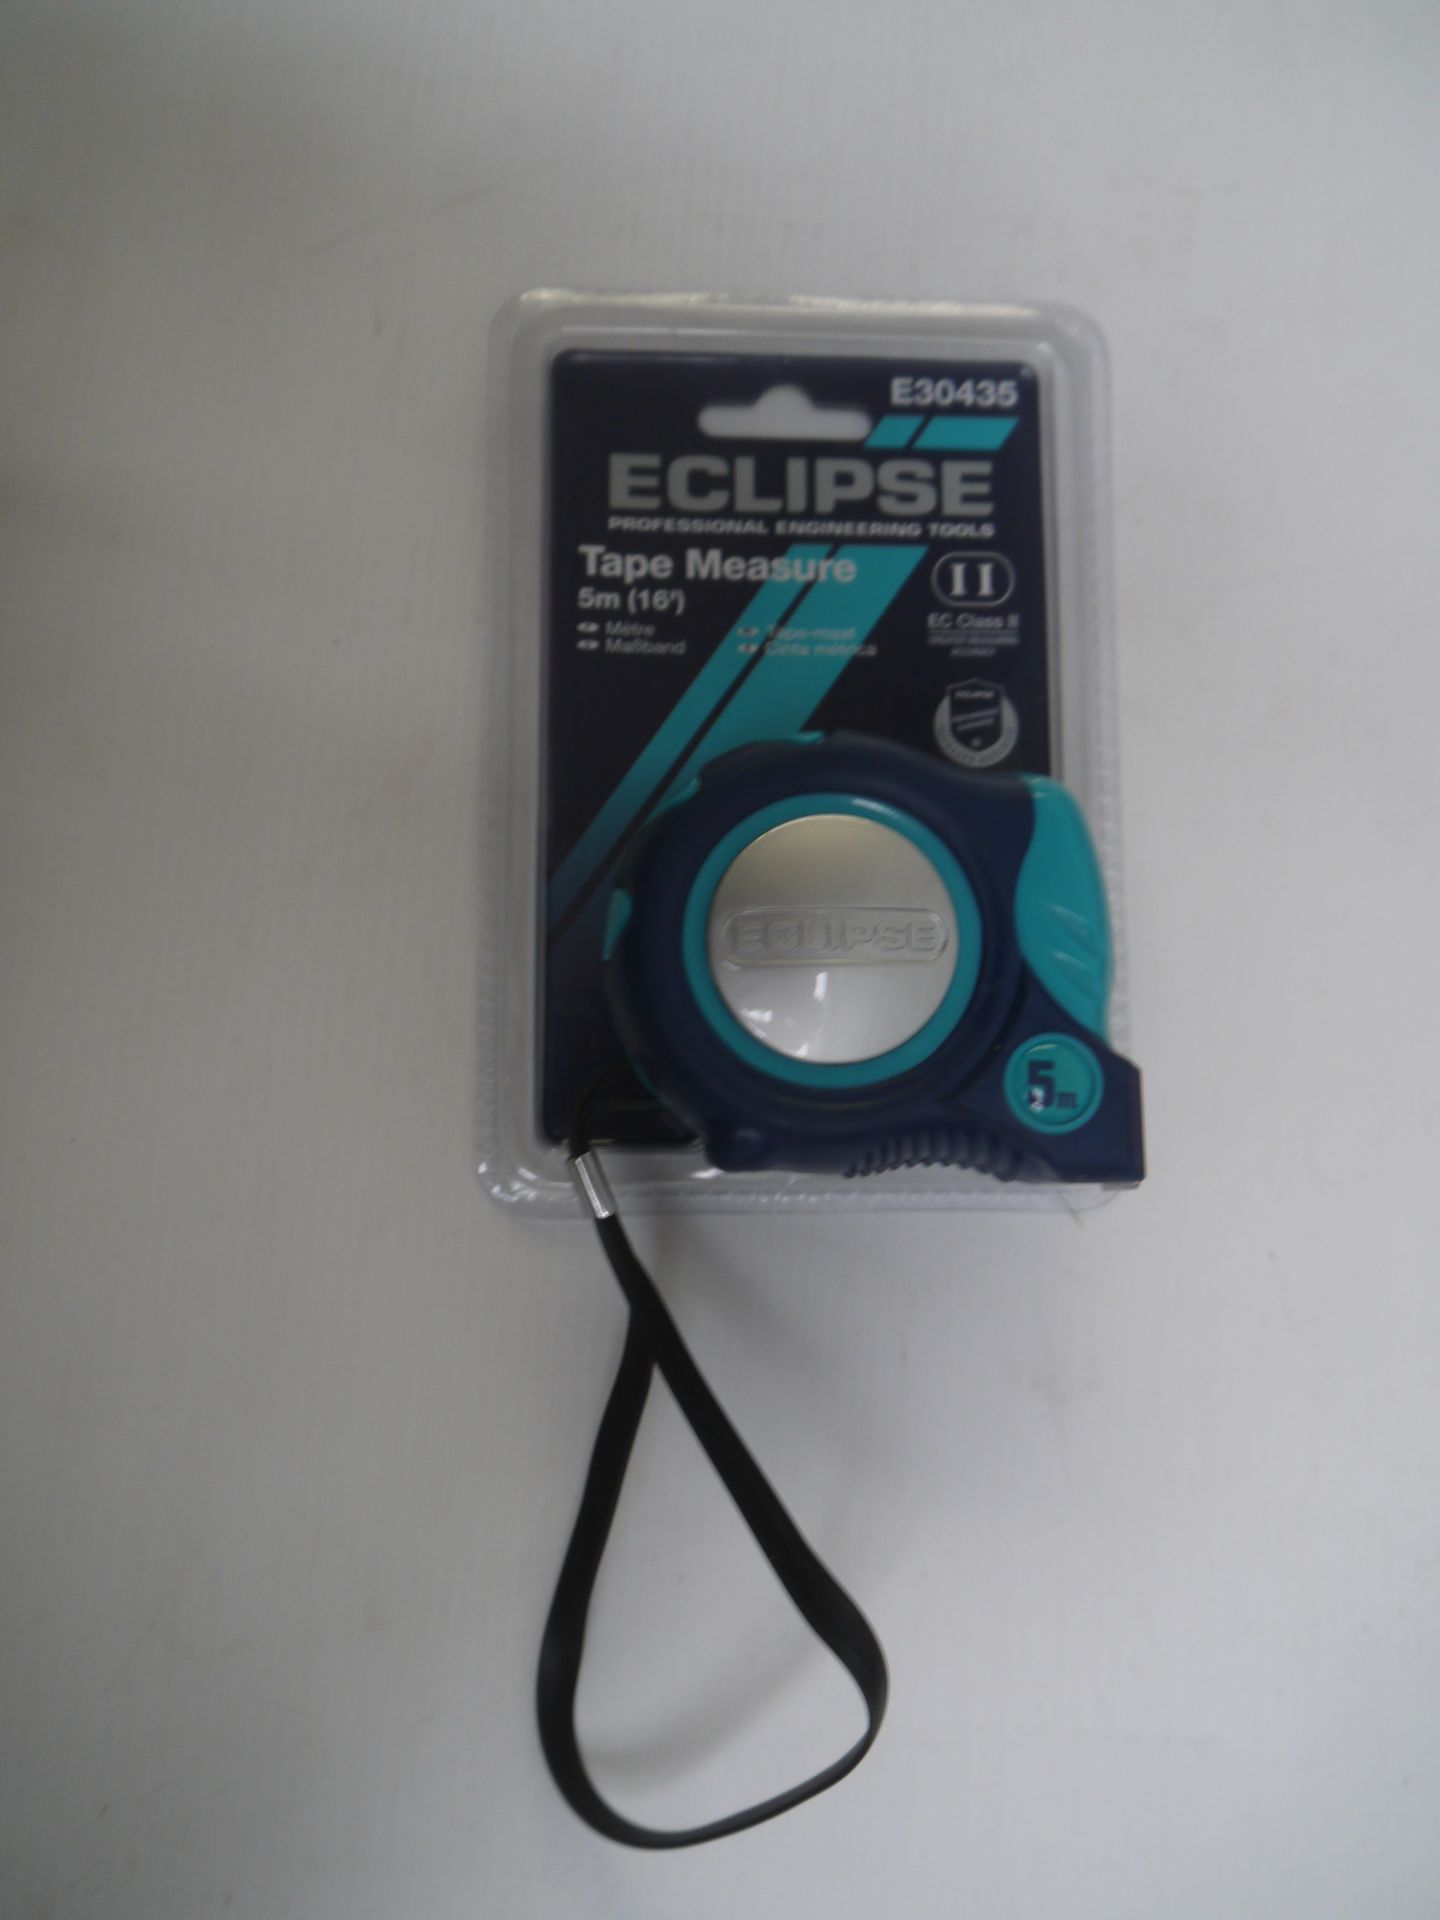 Eclipse 5mtr Tape Measure new still attached to packaging